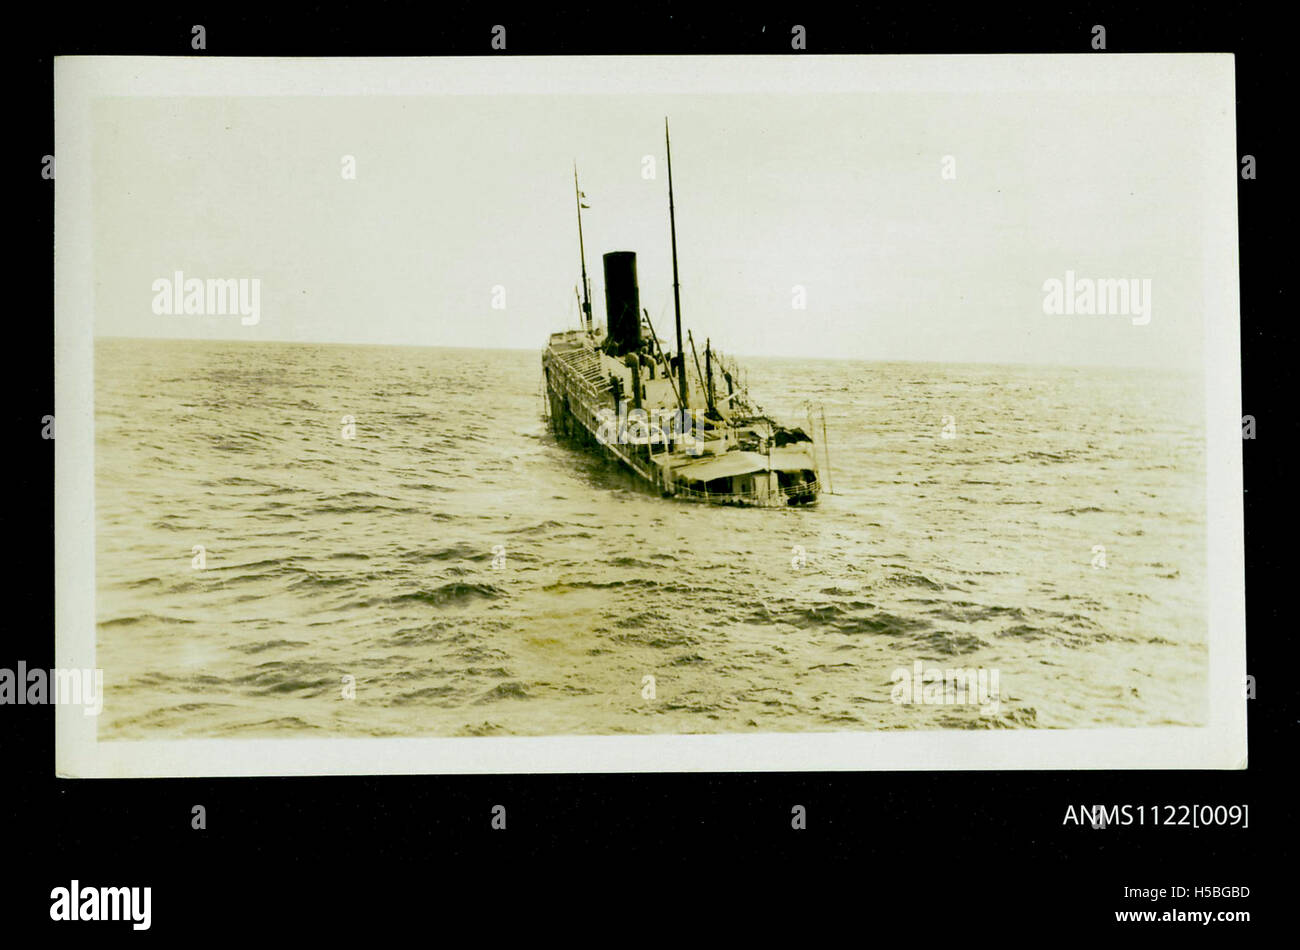 Photograph depicting the sinking liner RMS TAHITI Stock Photo - Alamy